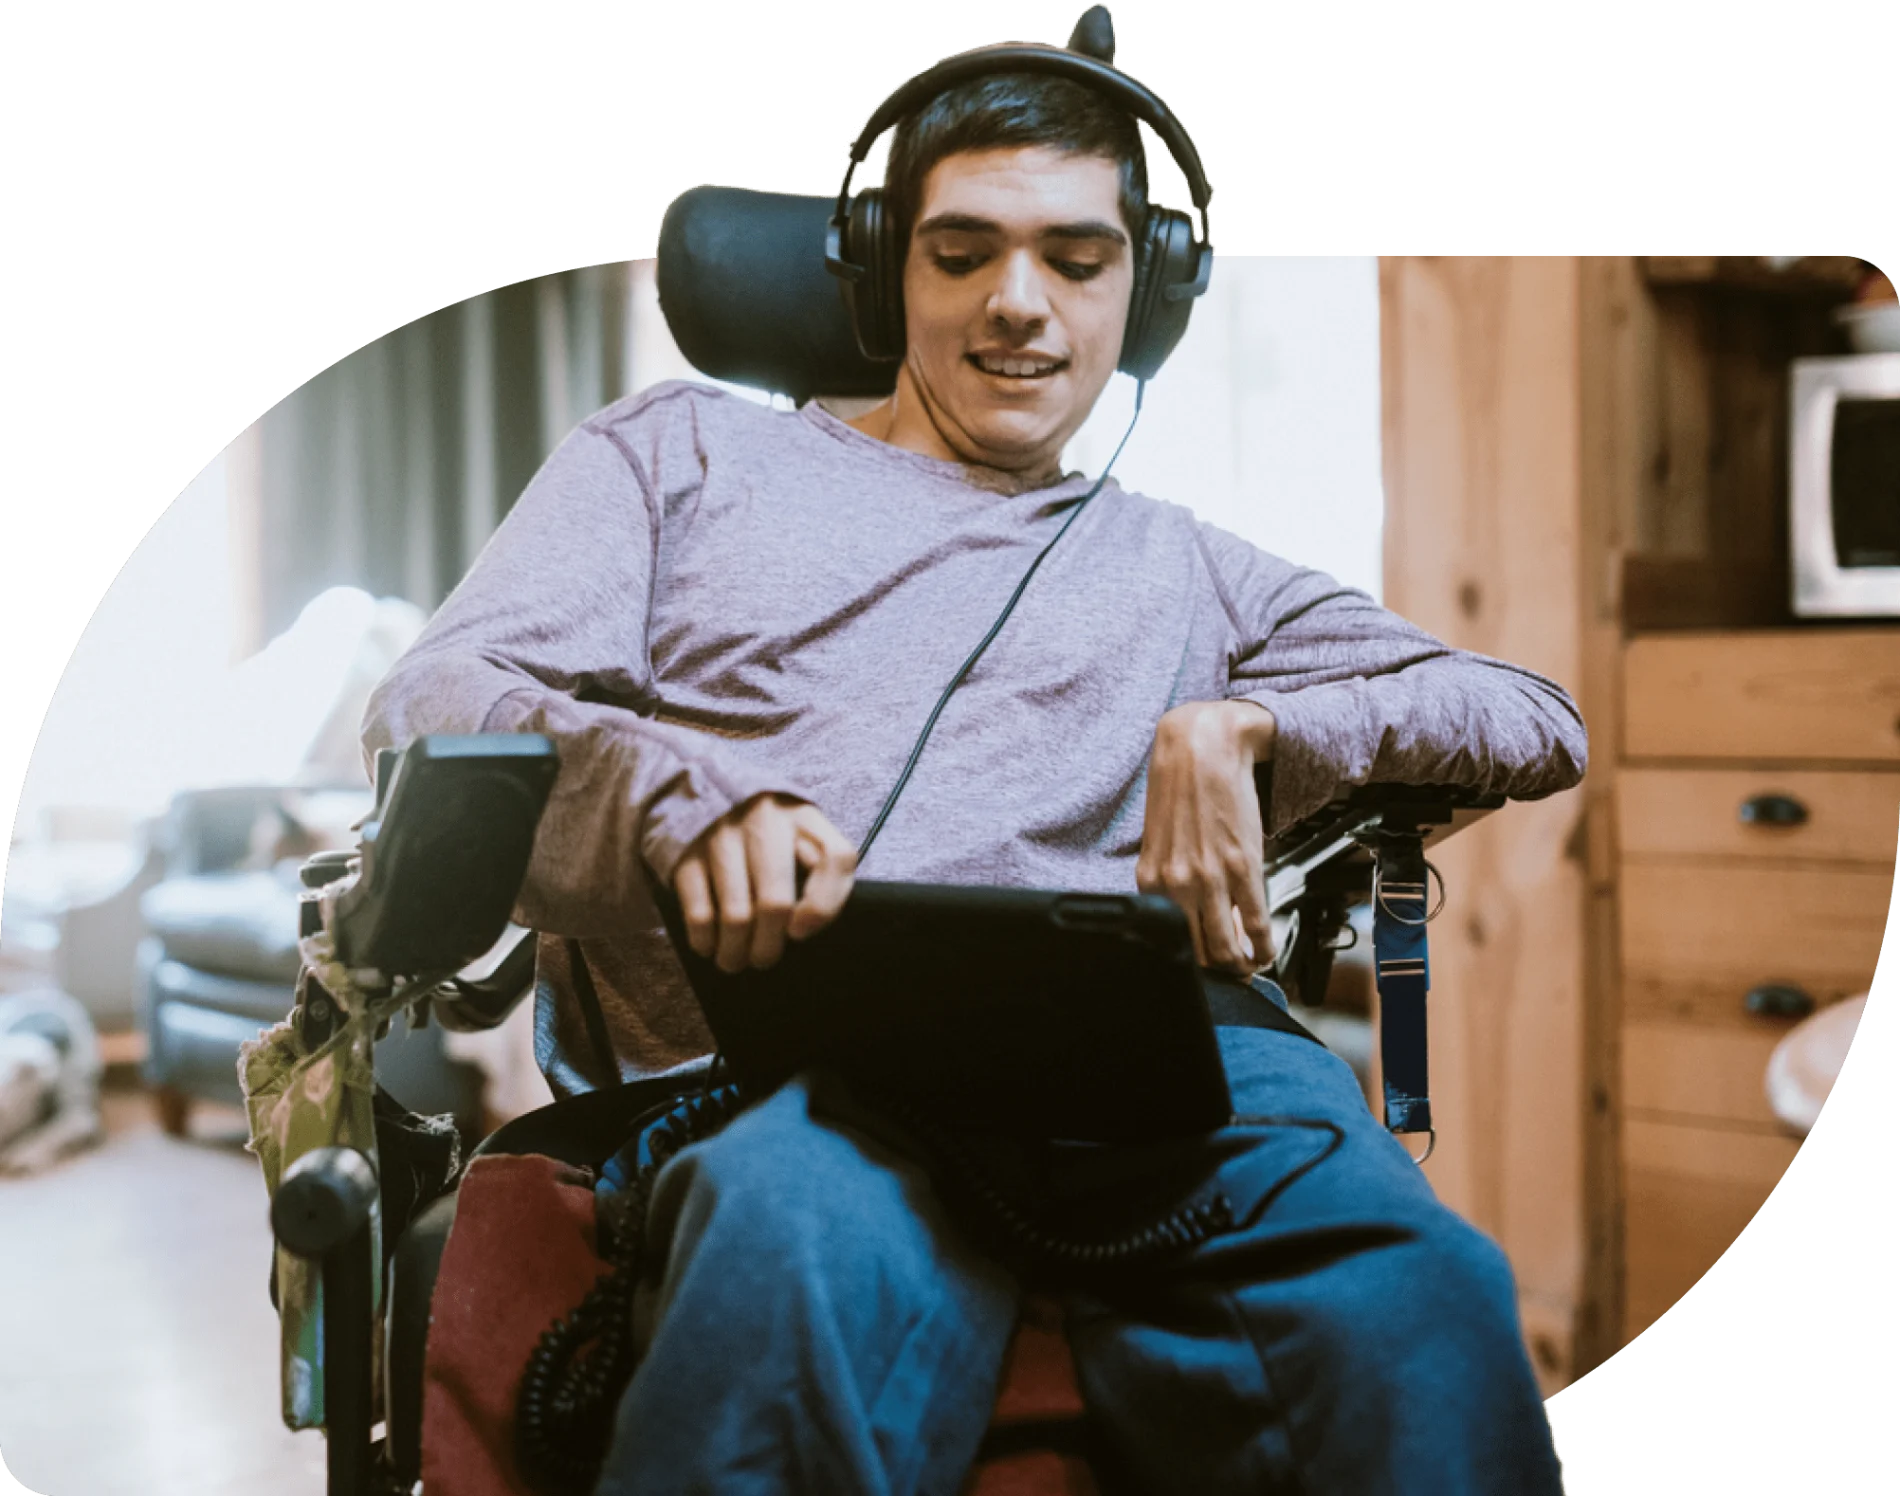 A young man in a wheelchair laughing as he observes a tablet screen